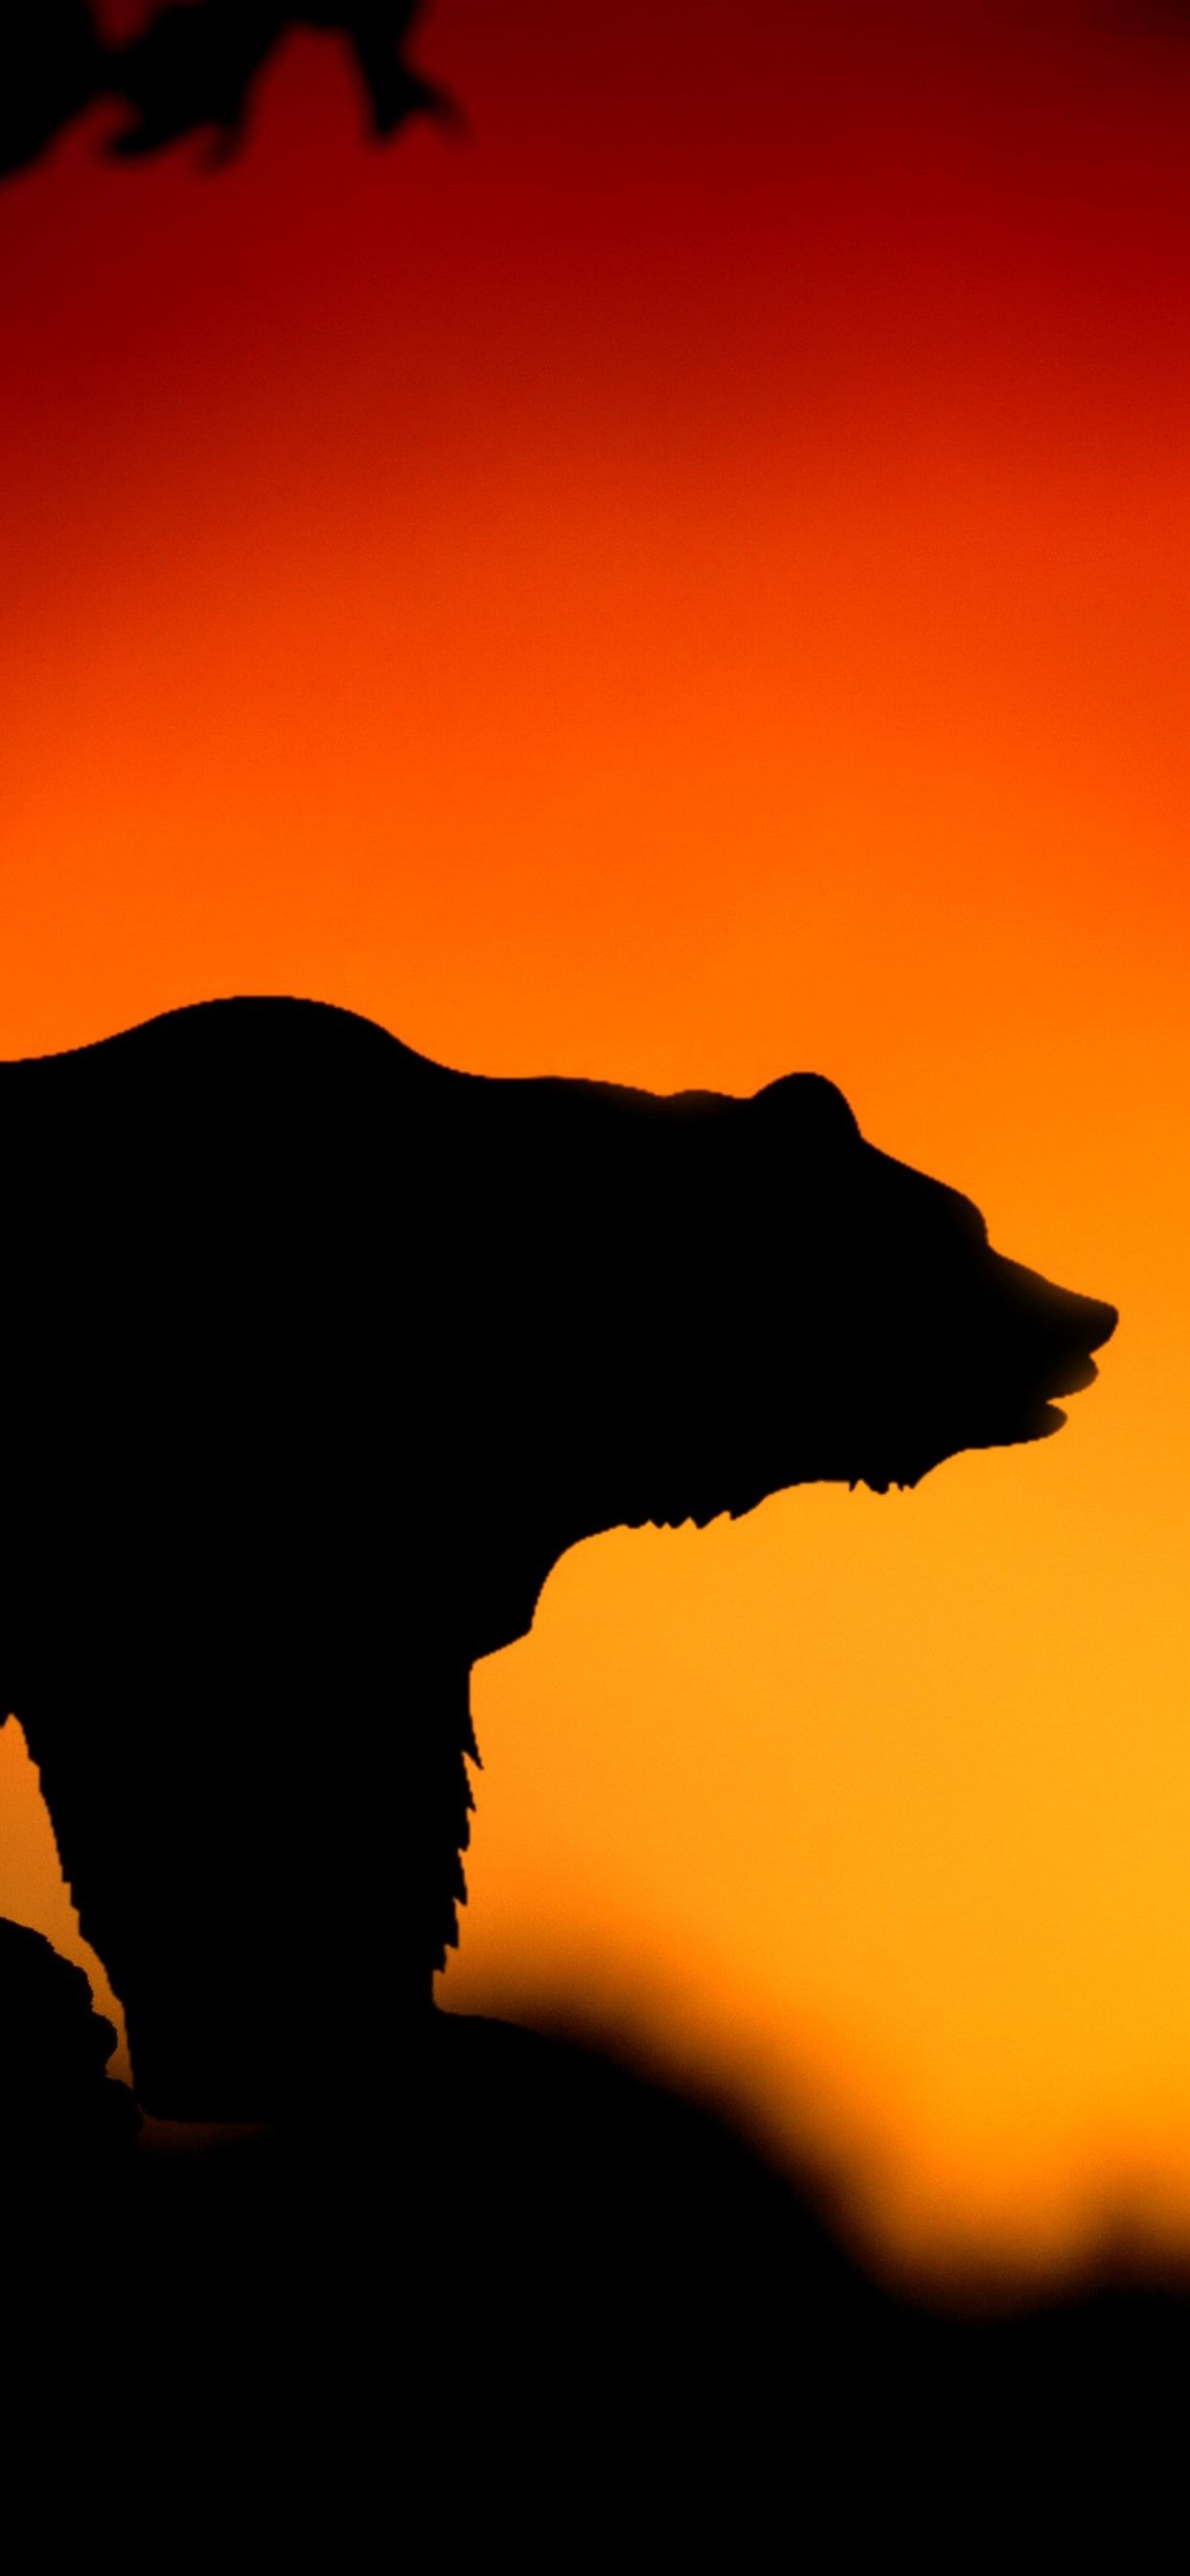 Wallpaper Bear, sunset, silhouette 3840x2160 UHD 4K Picture, Image